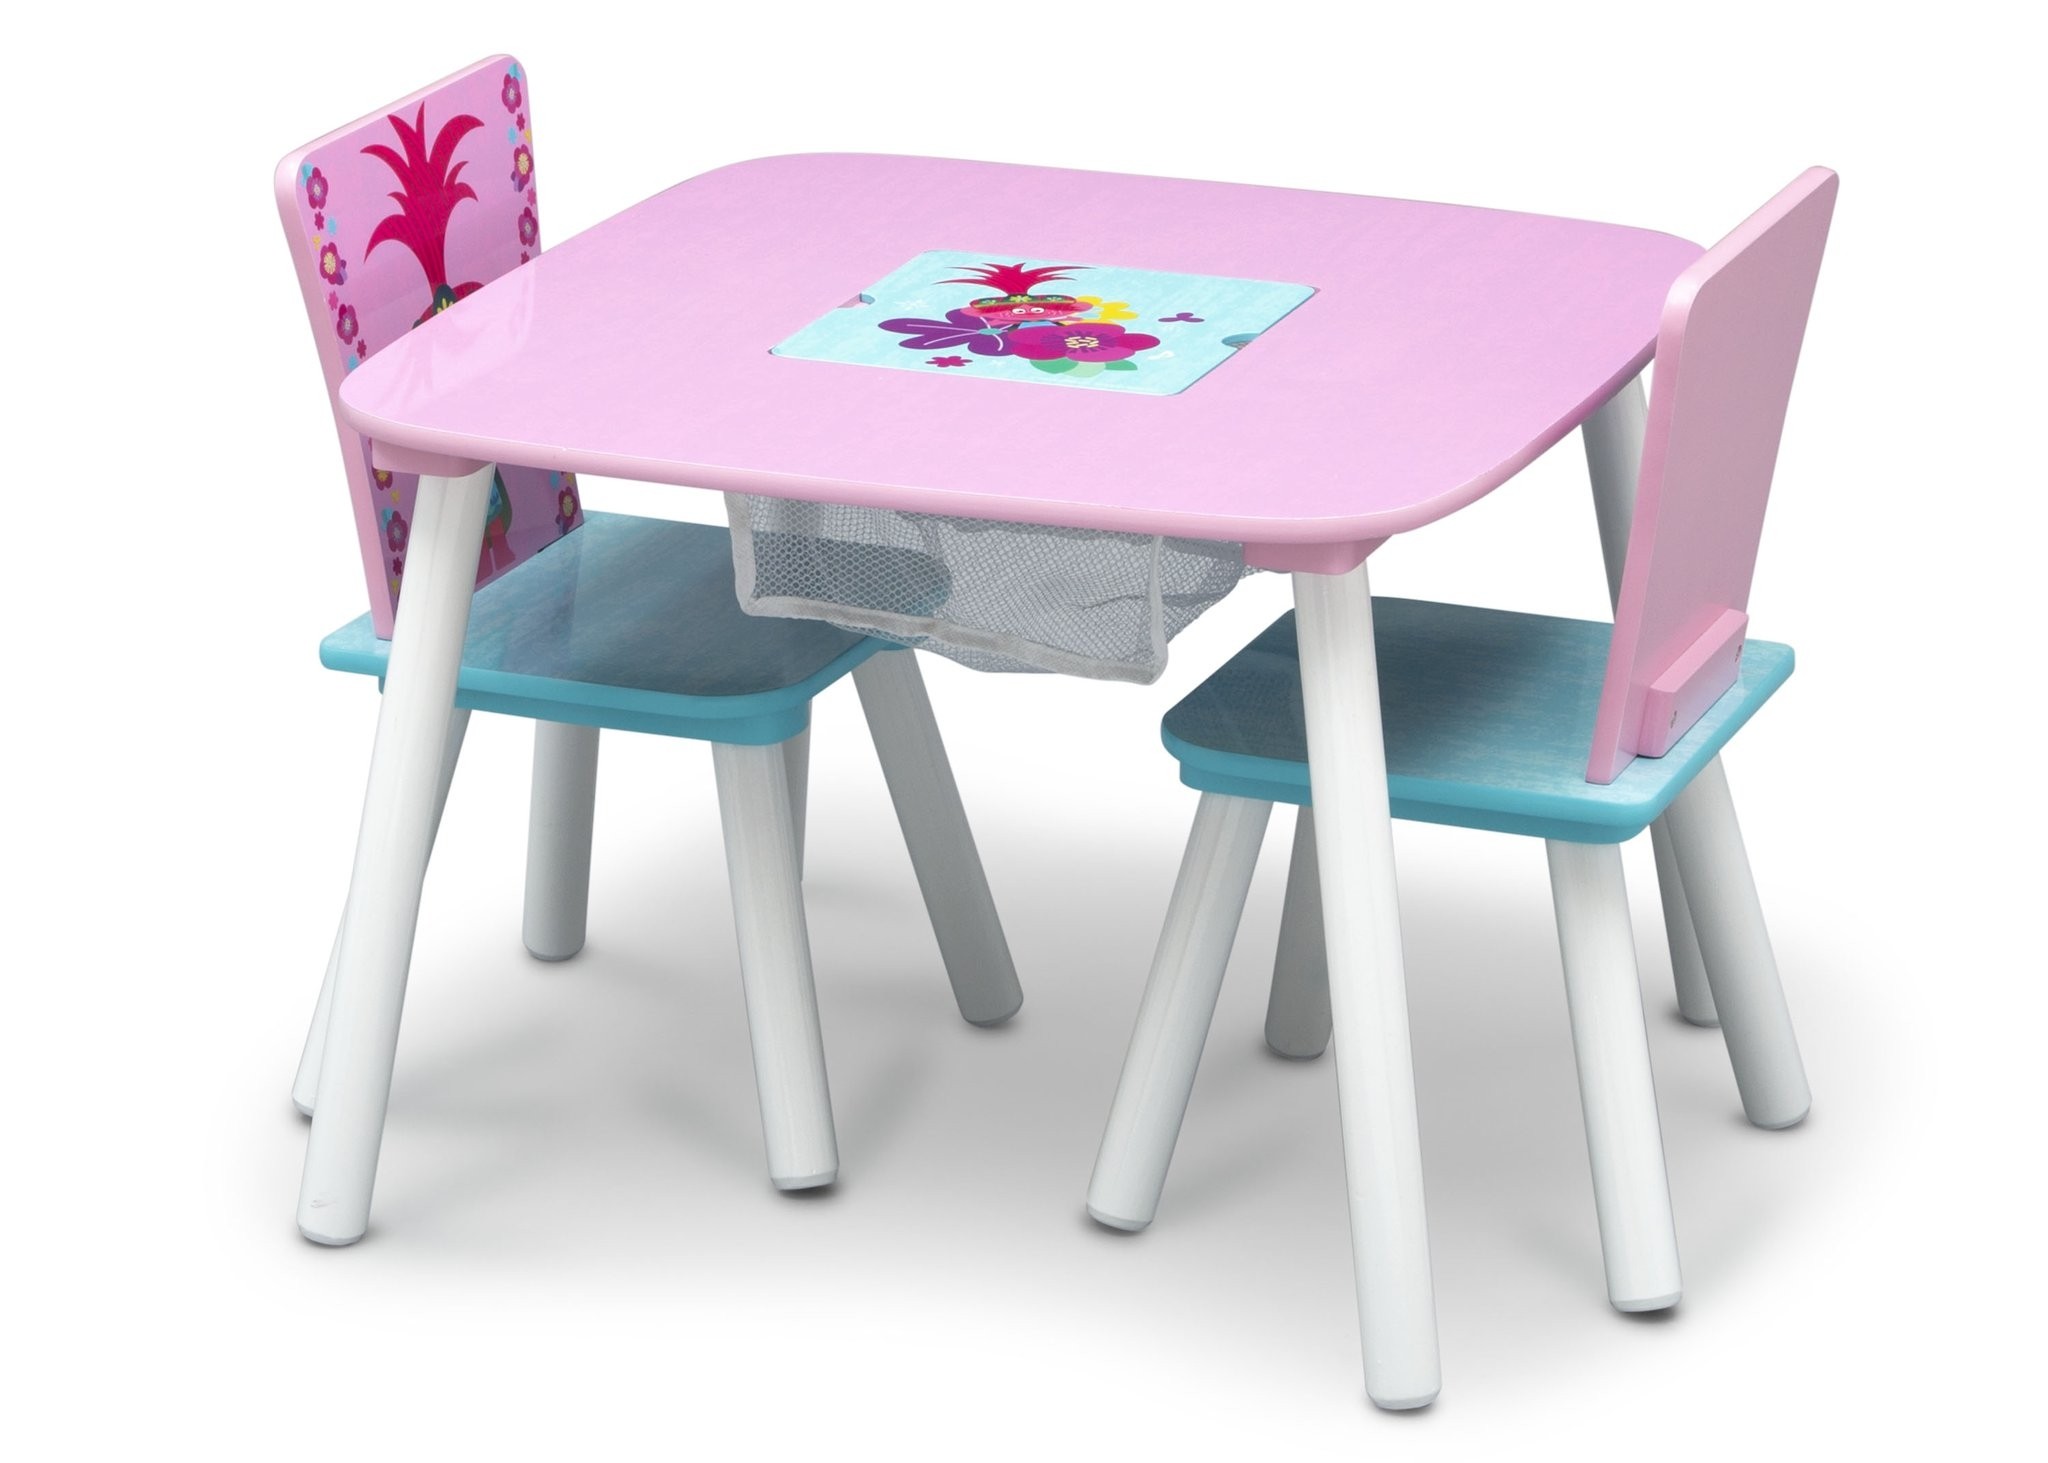 Trolls world tour table and chair set with storage delta